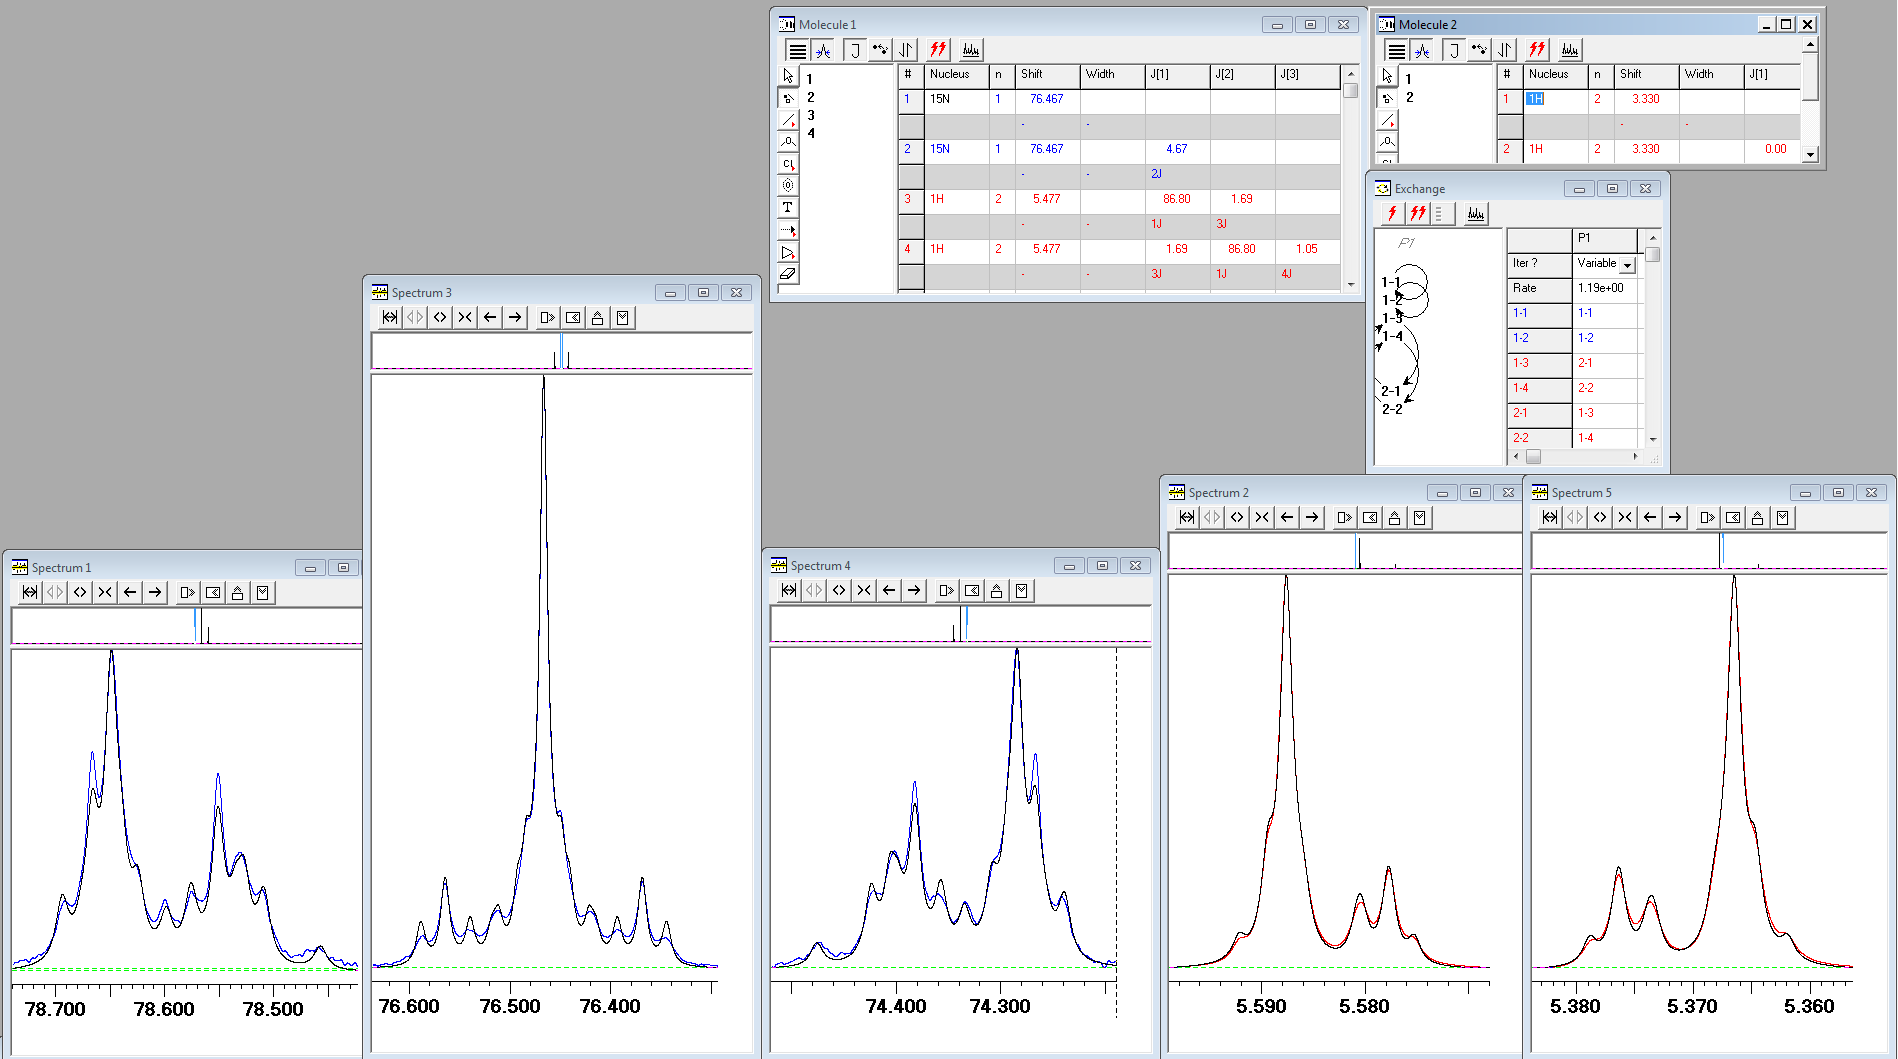 1H and 15N spectra of 15N labelled urea with water exchange